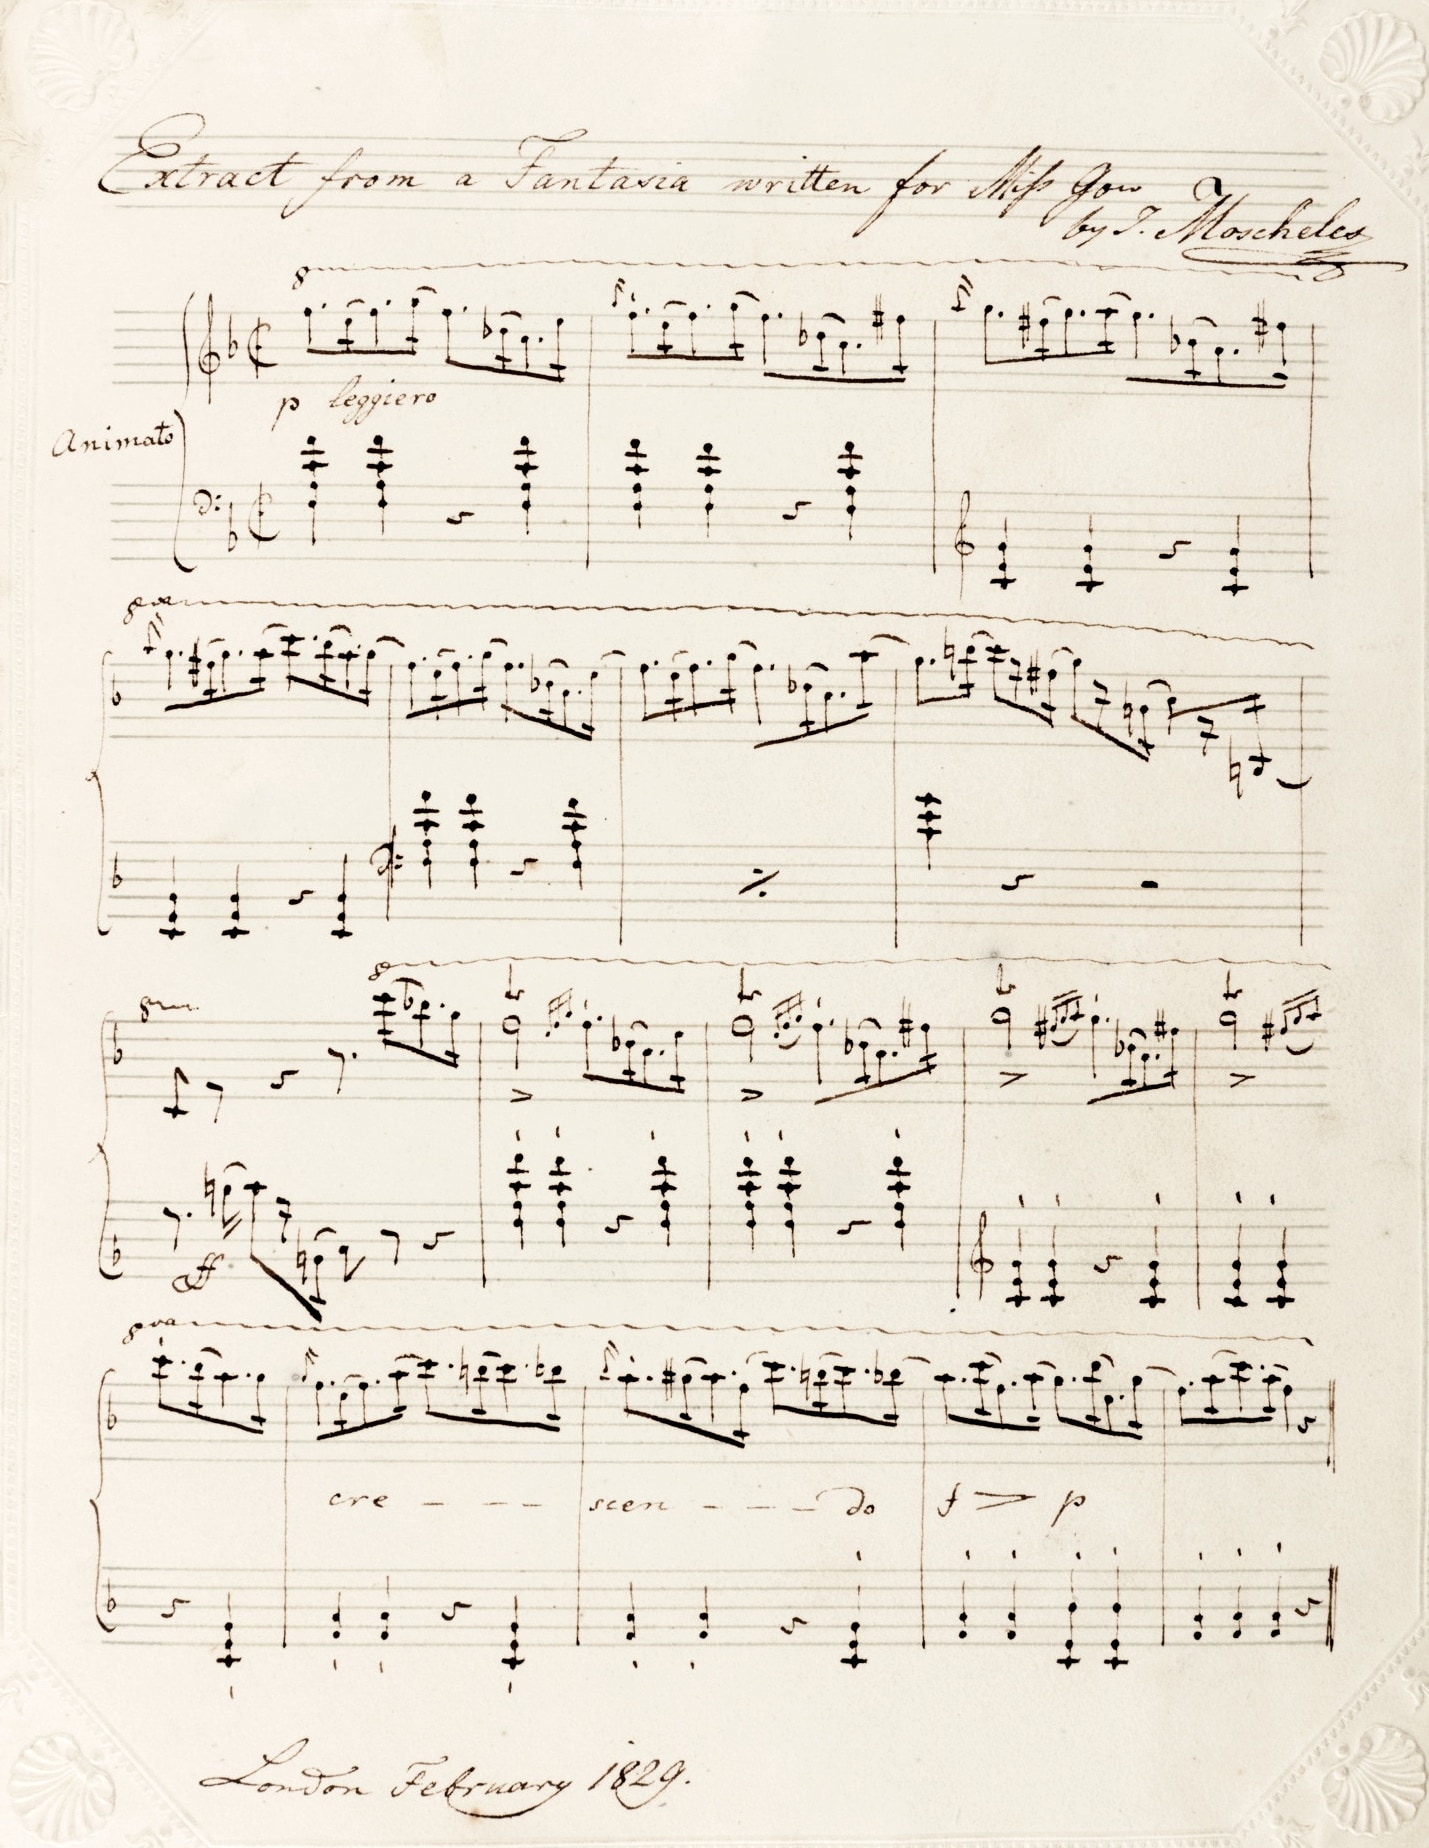 Extract from a Fantasia written for Miss Gow by I. Moscheles, London, February 1829; Sydney Living Museums